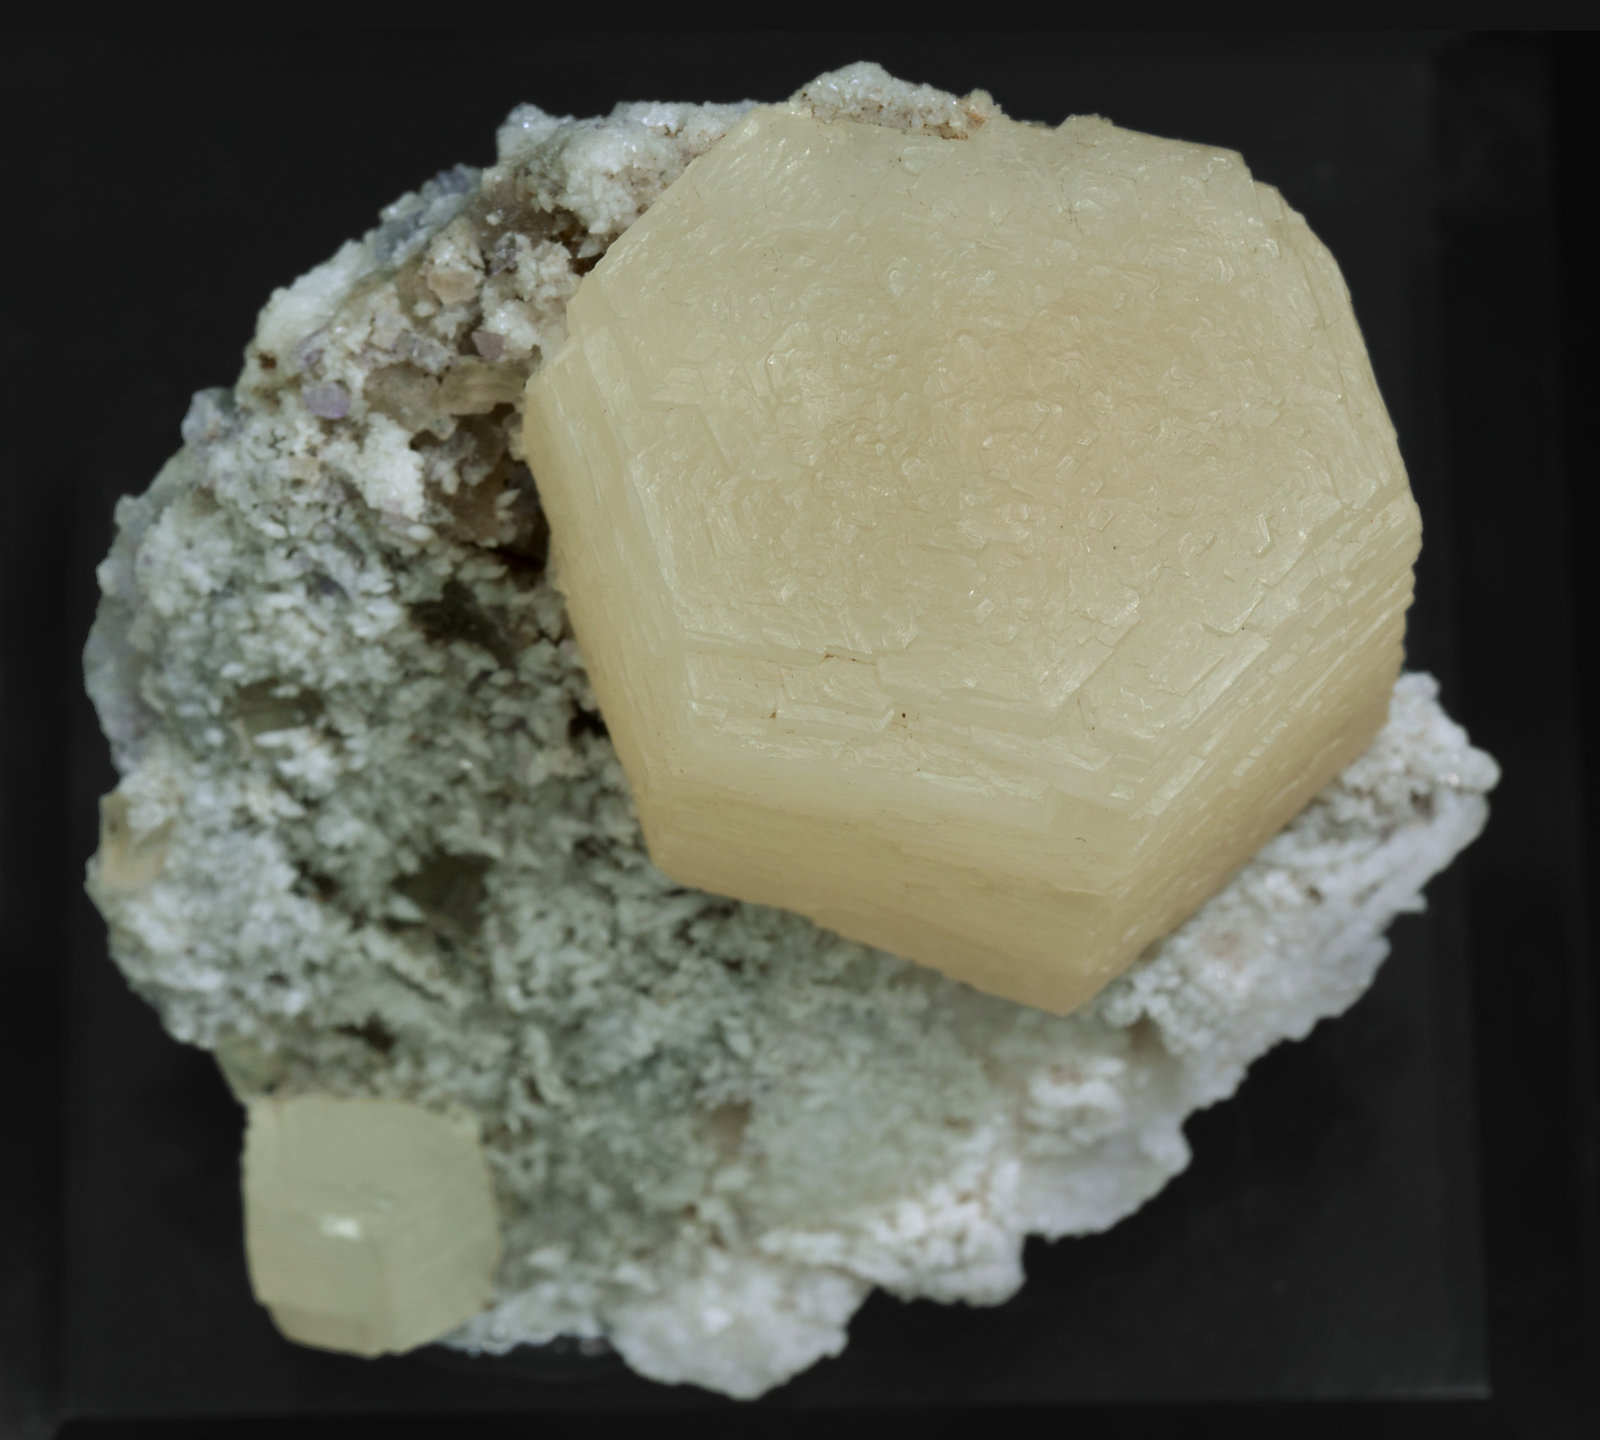 specimens/s_imagesY3/Witherite-EX89Y3t.jpg